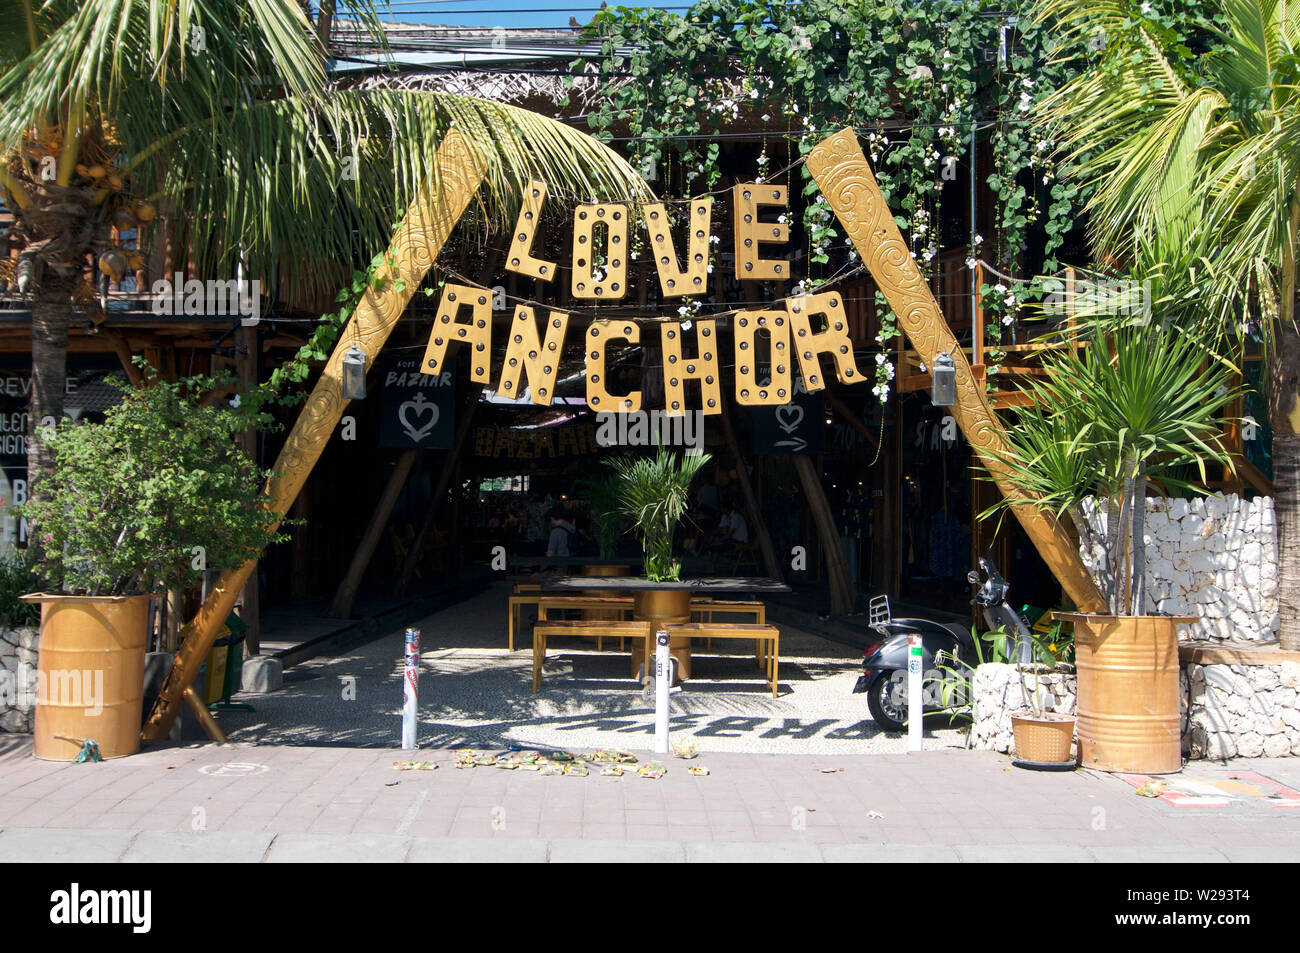 Canggu, Bali, Indonesia - 4th June 2019 : View of the famous Love Anchor  Market entrance sign located in Bali tourist hotspot Canggu, Indonesia  Stock Photo - Alamy